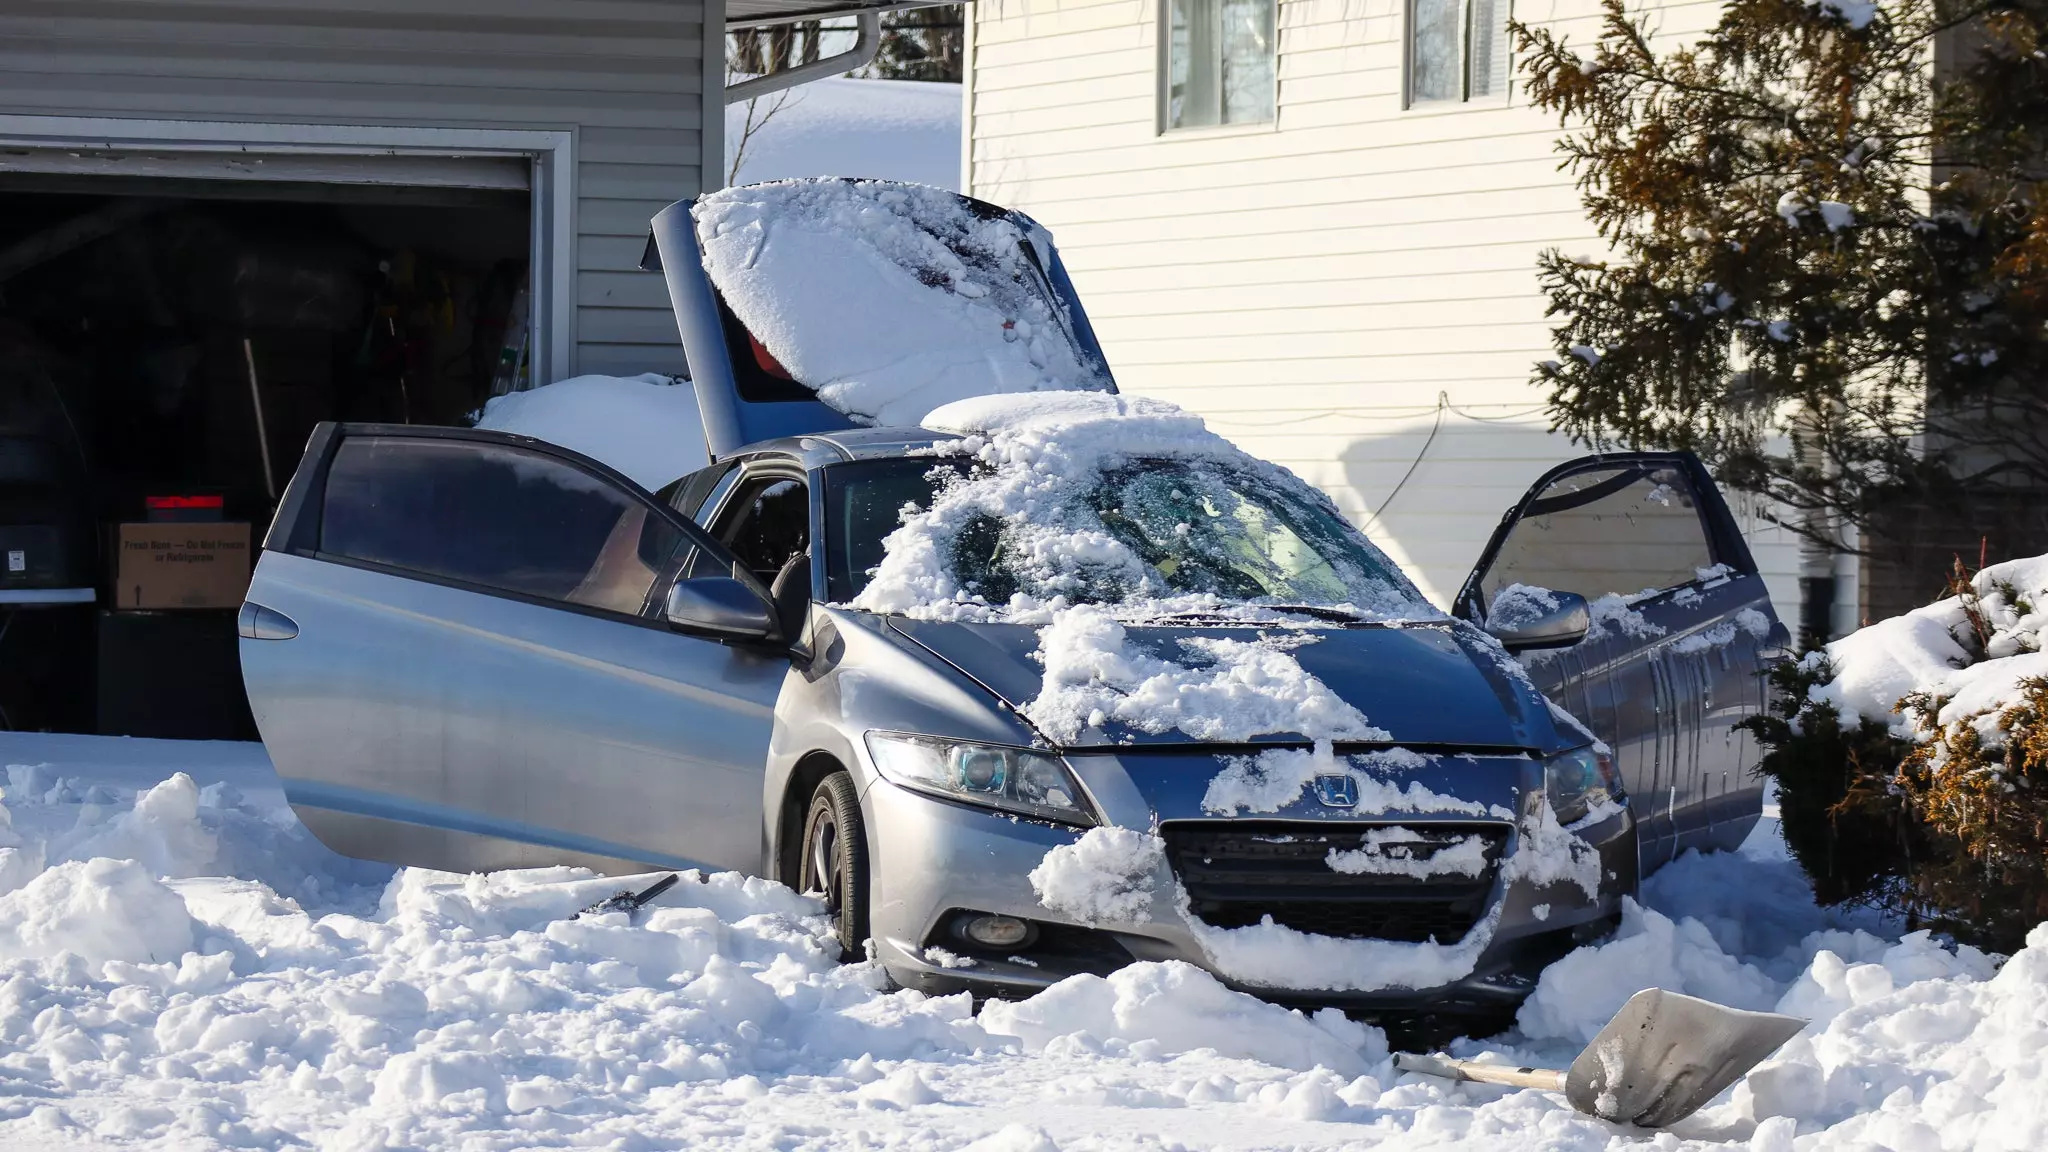 I Shoveled a Foot of Snow From an Elderly Woman’s Driveway To Save This Honda CR-Z